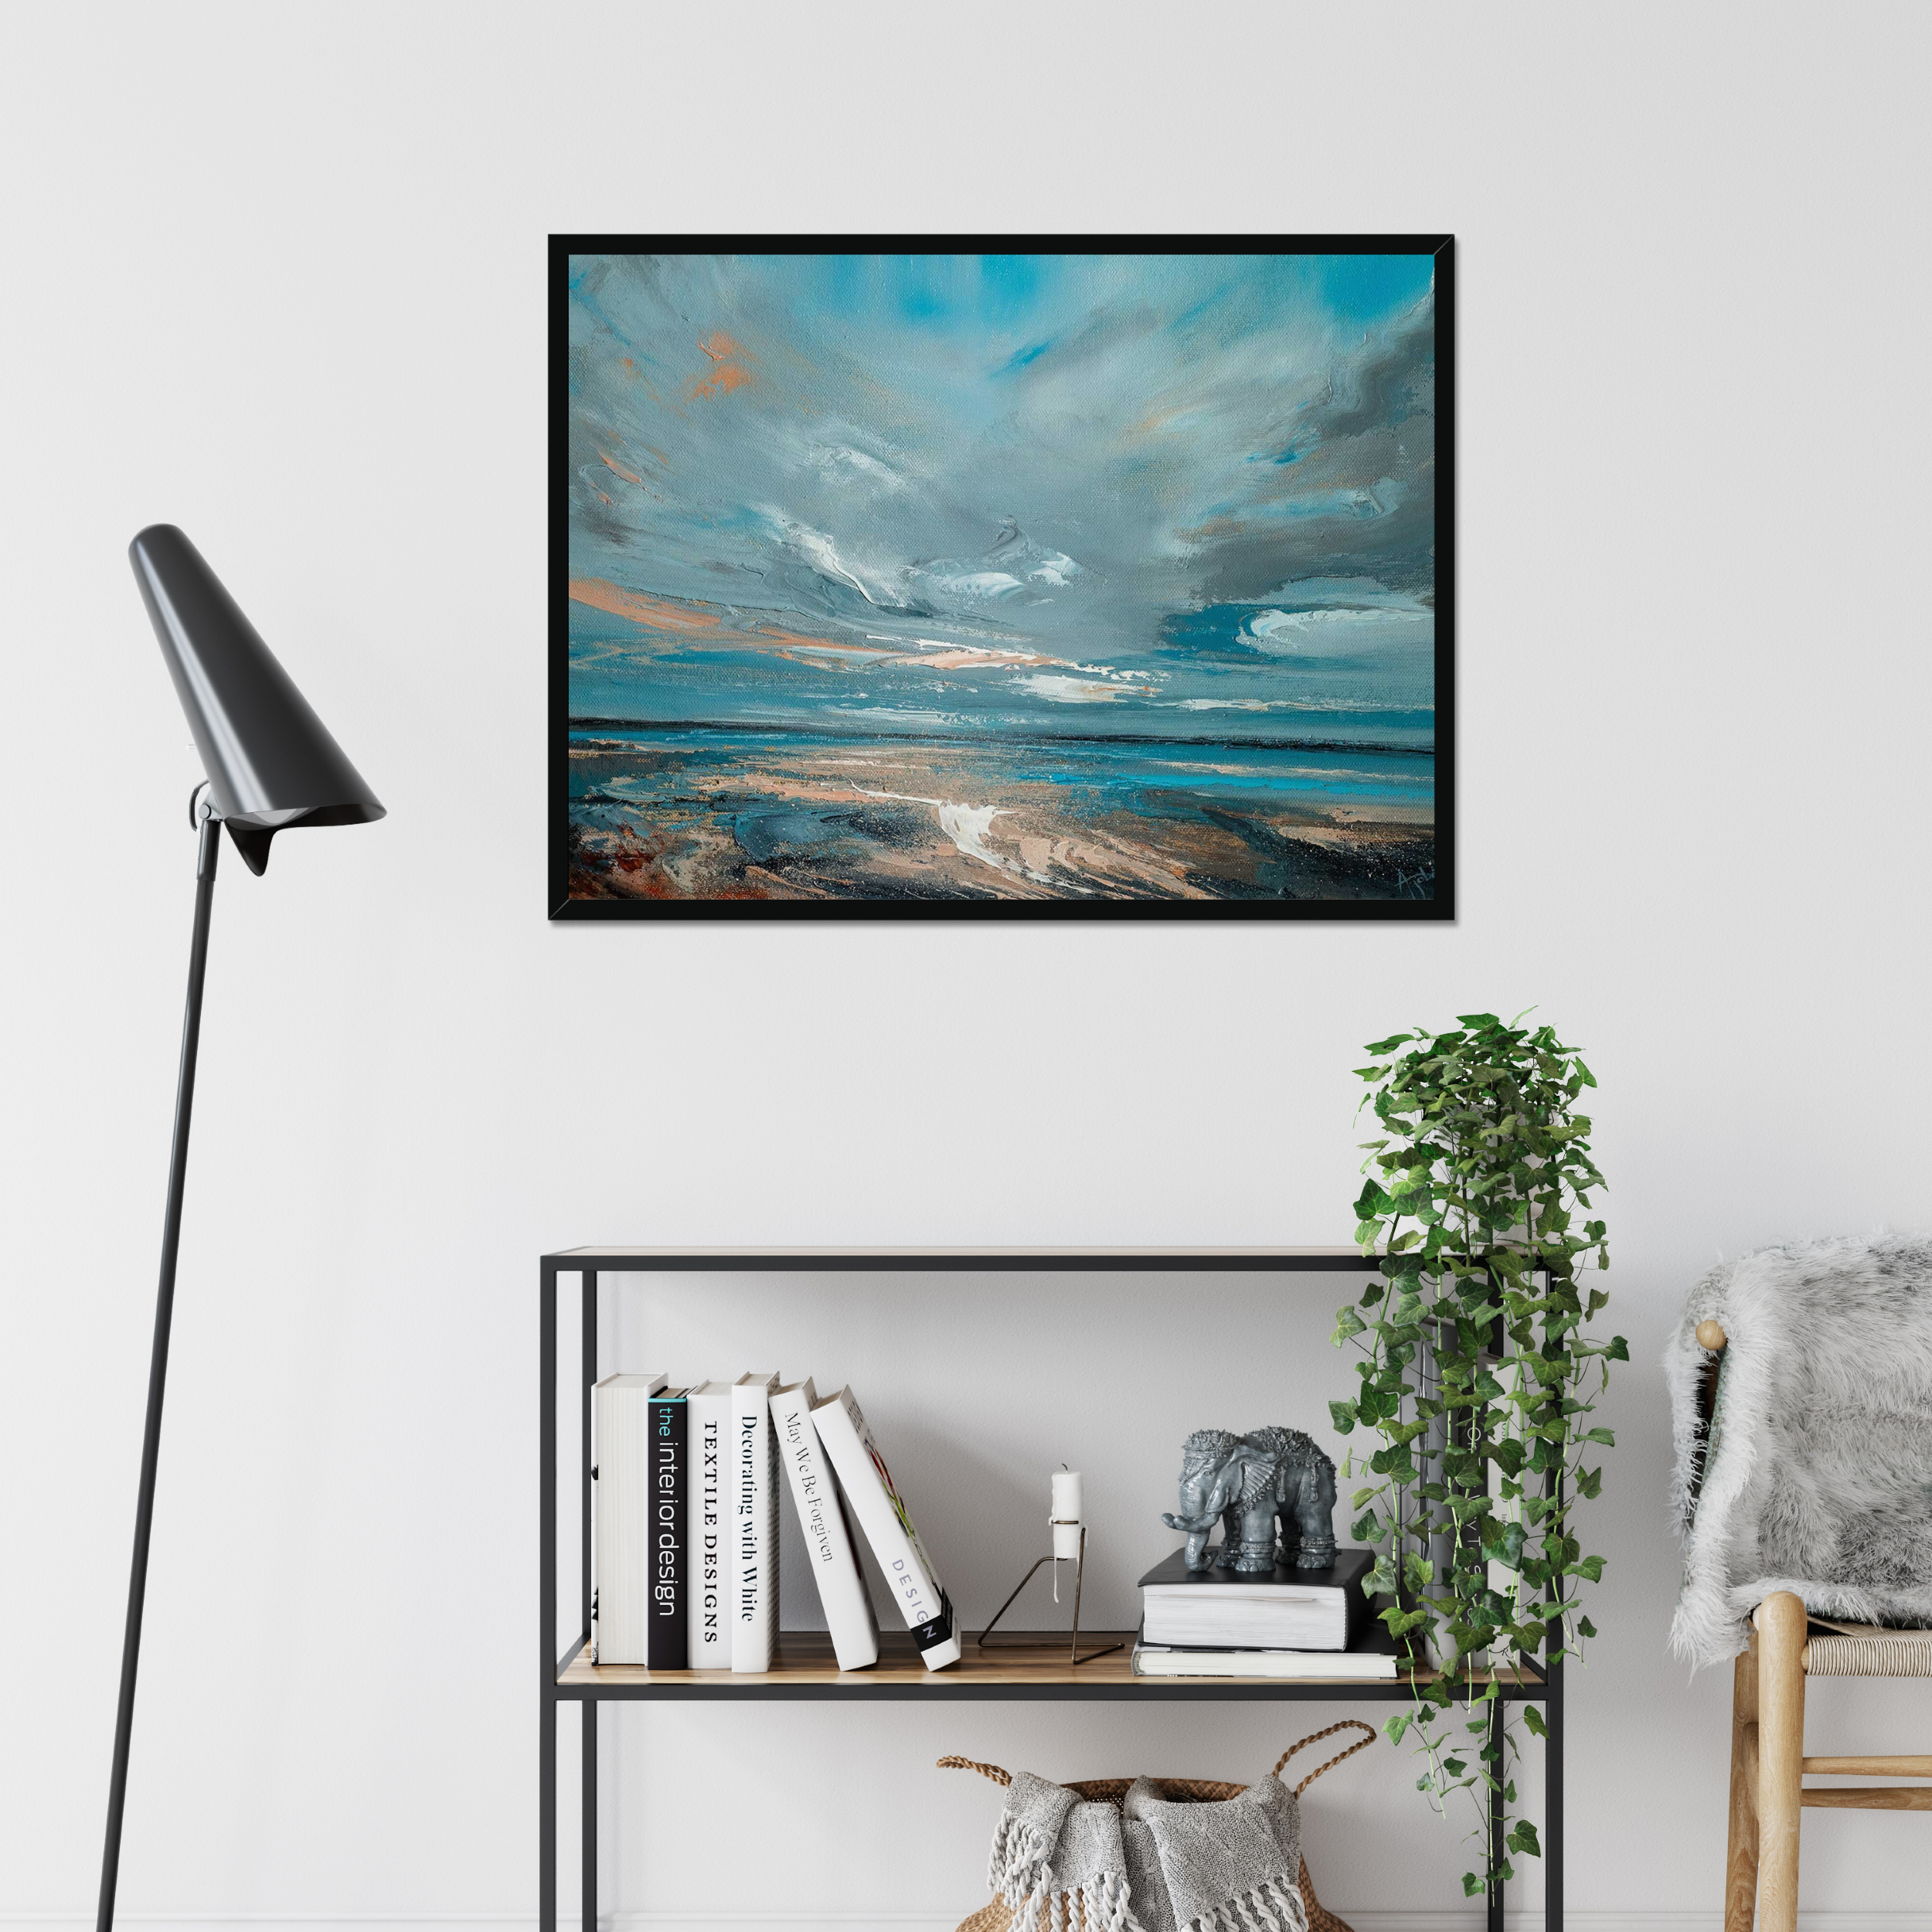 a limited edition series of coastal landscape artwork created by contemporary artist Amy Jobes